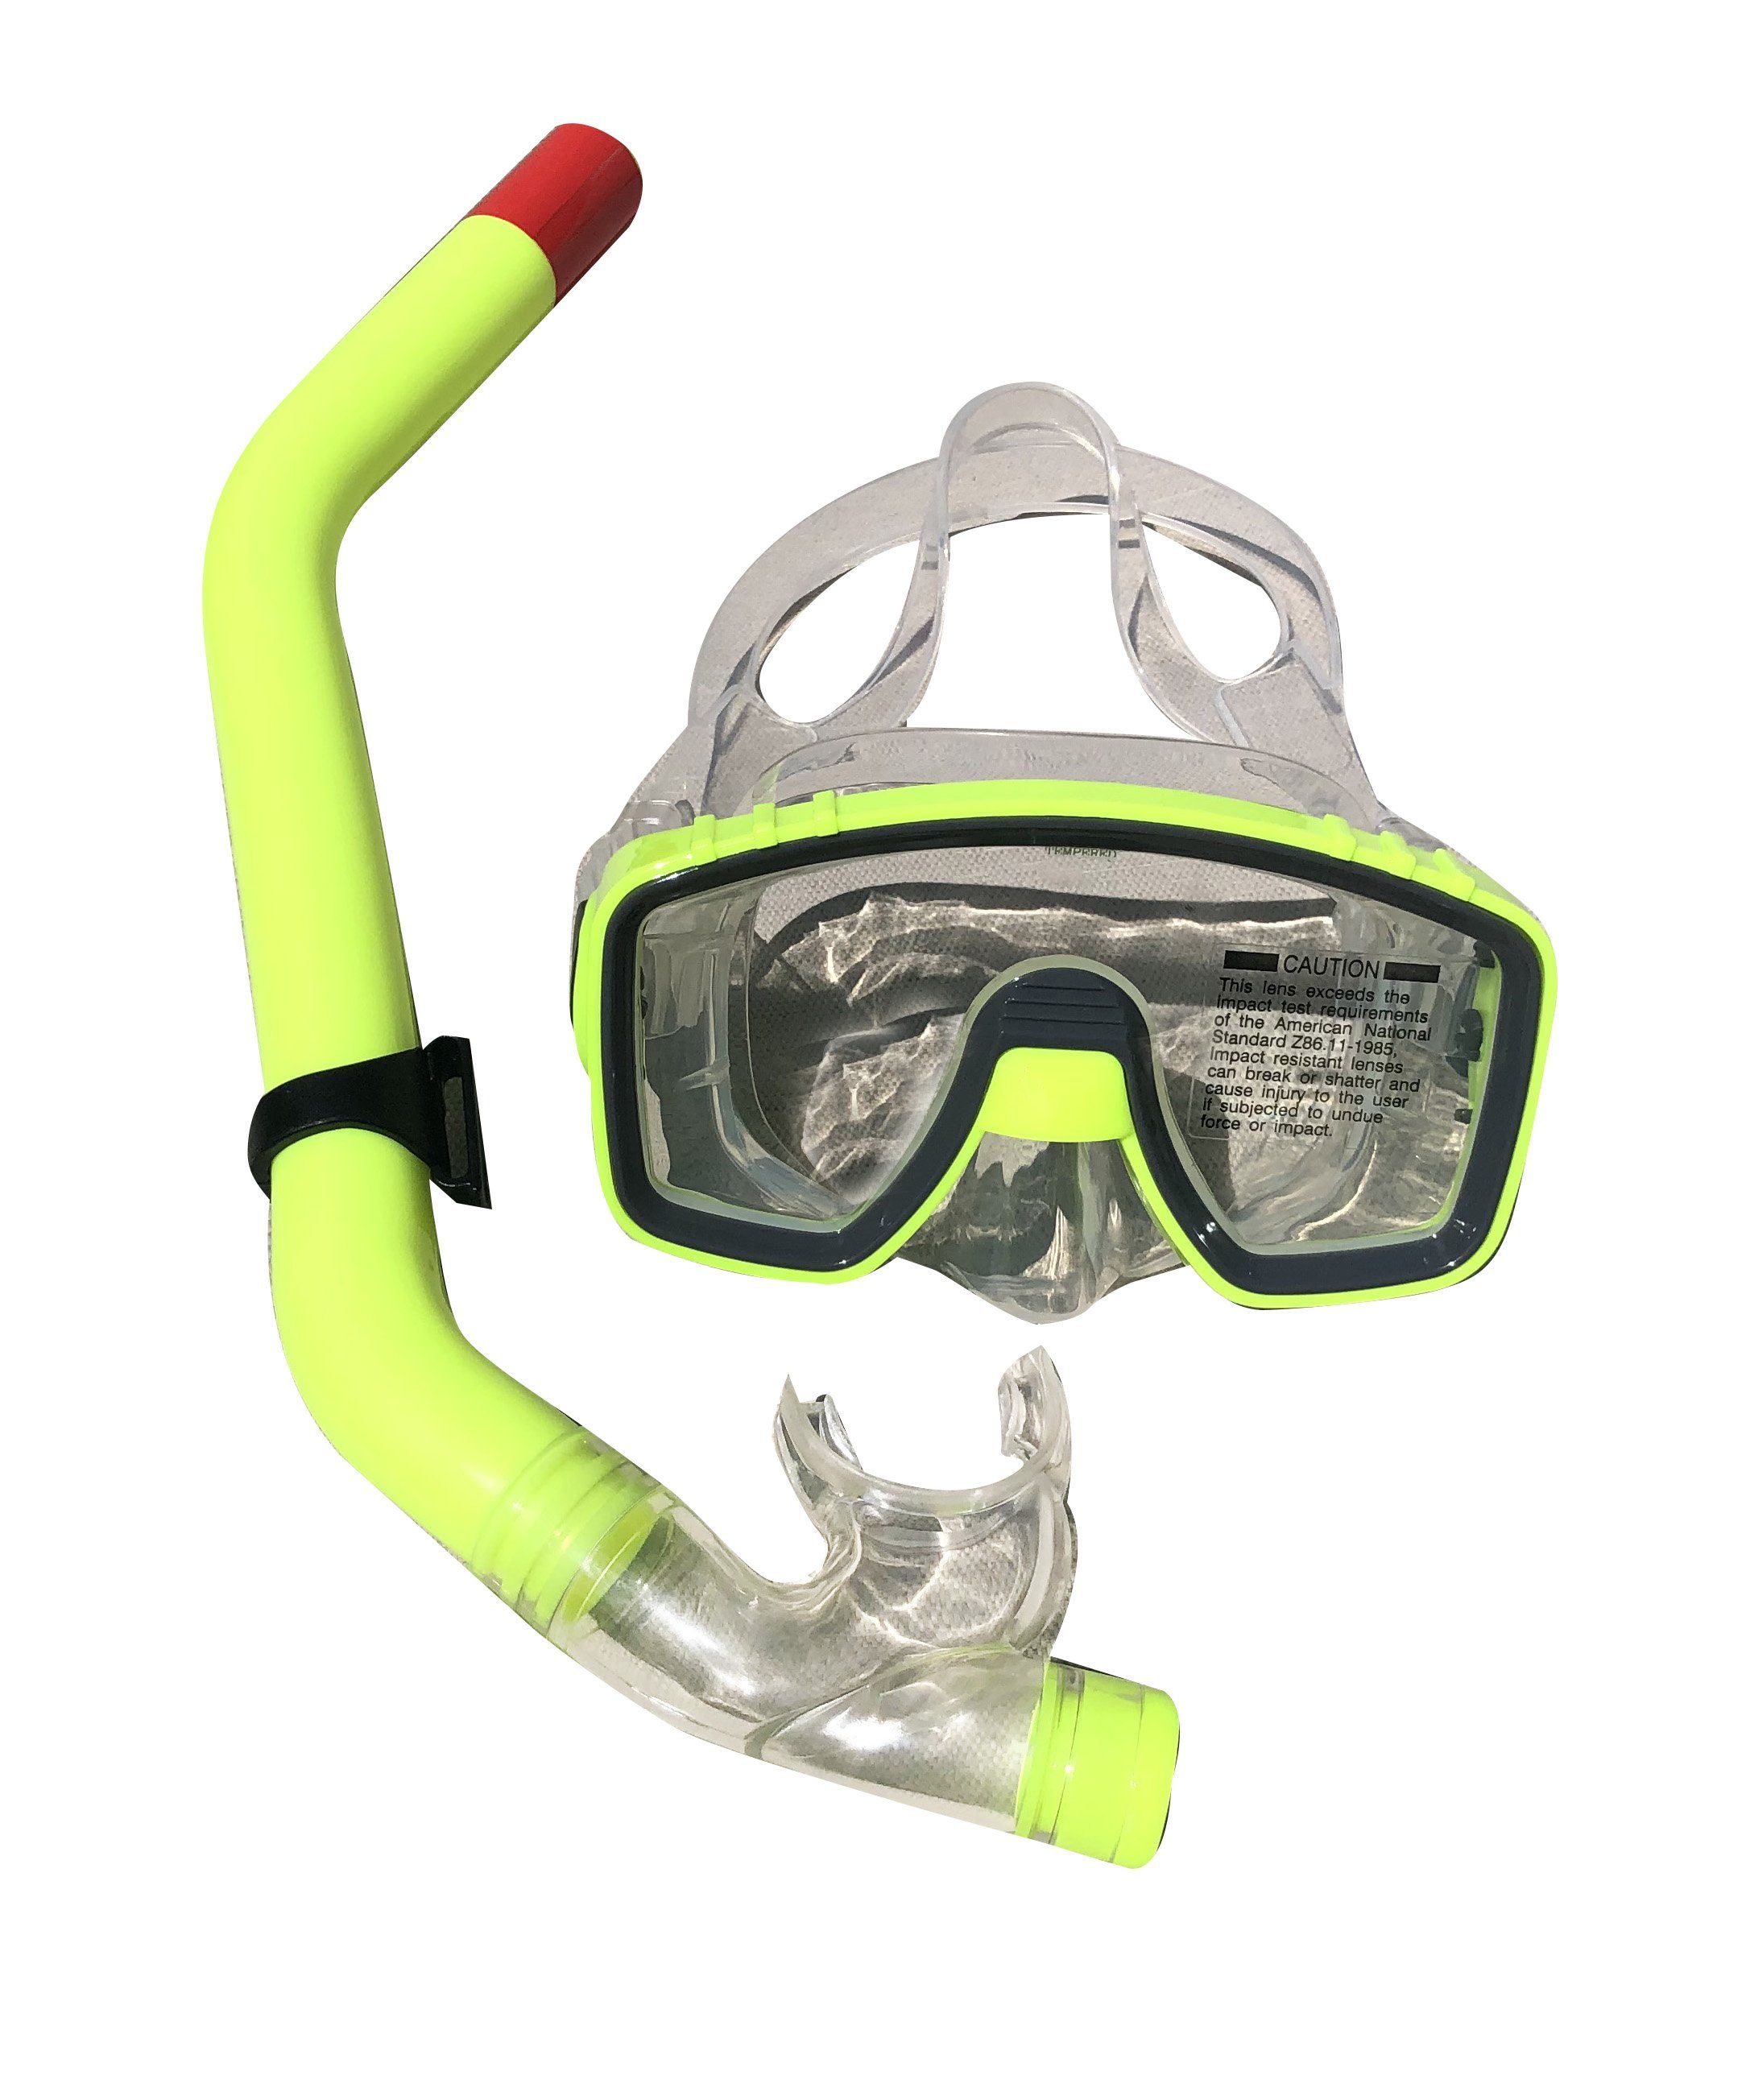 Snorkel and Dive Mask For Underwater Treasure Hunting - Yellow